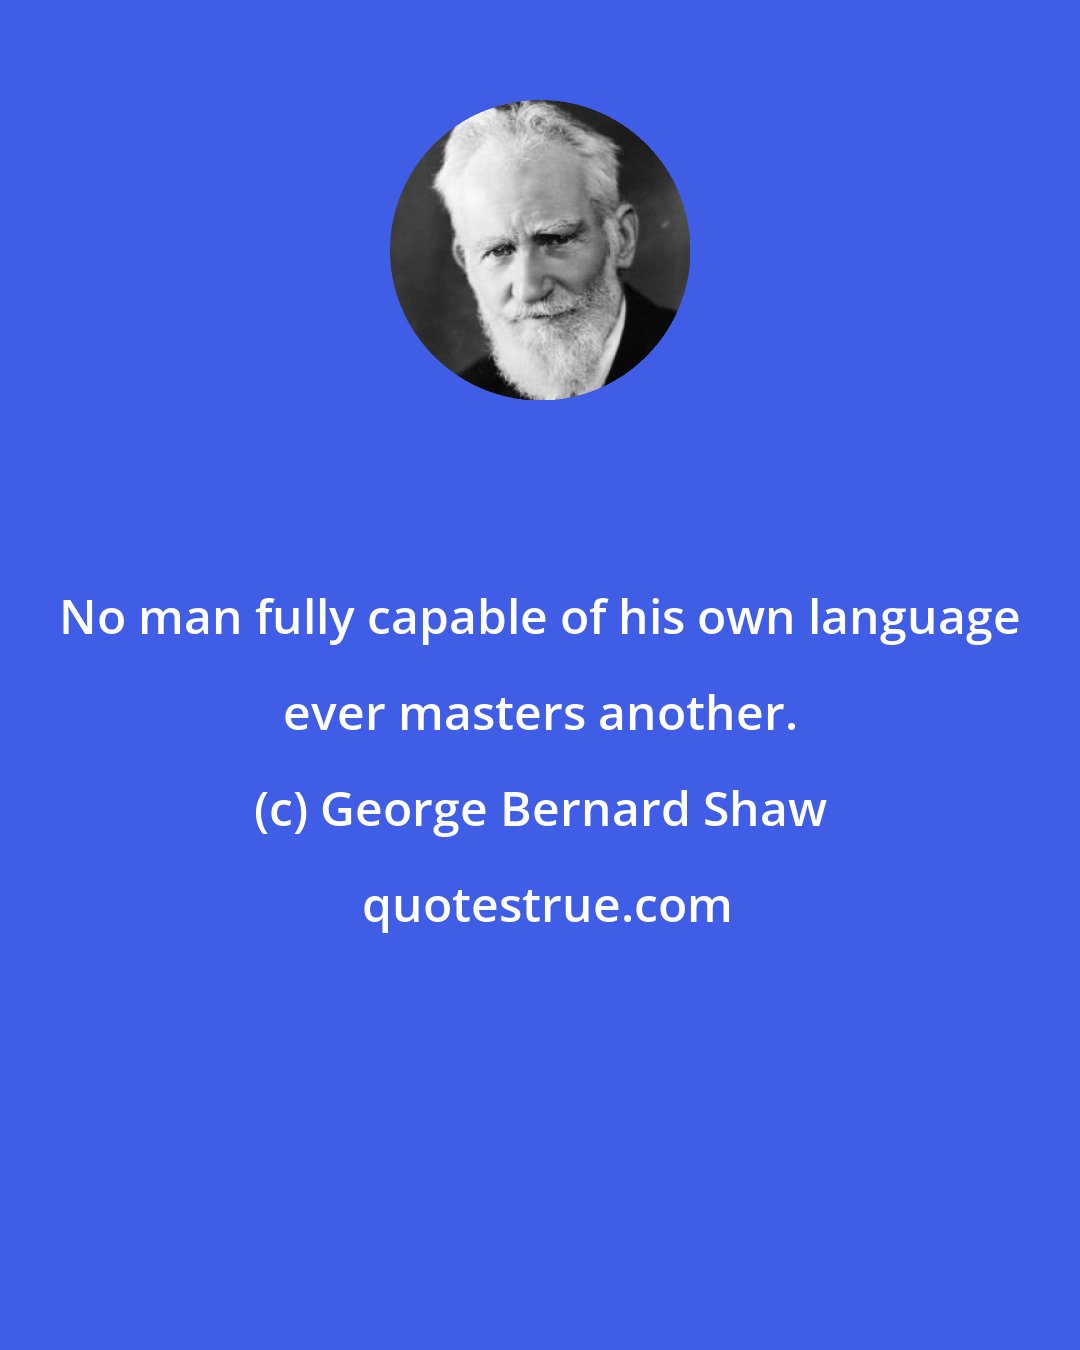 George Bernard Shaw: No man fully capable of his own language ever masters another.